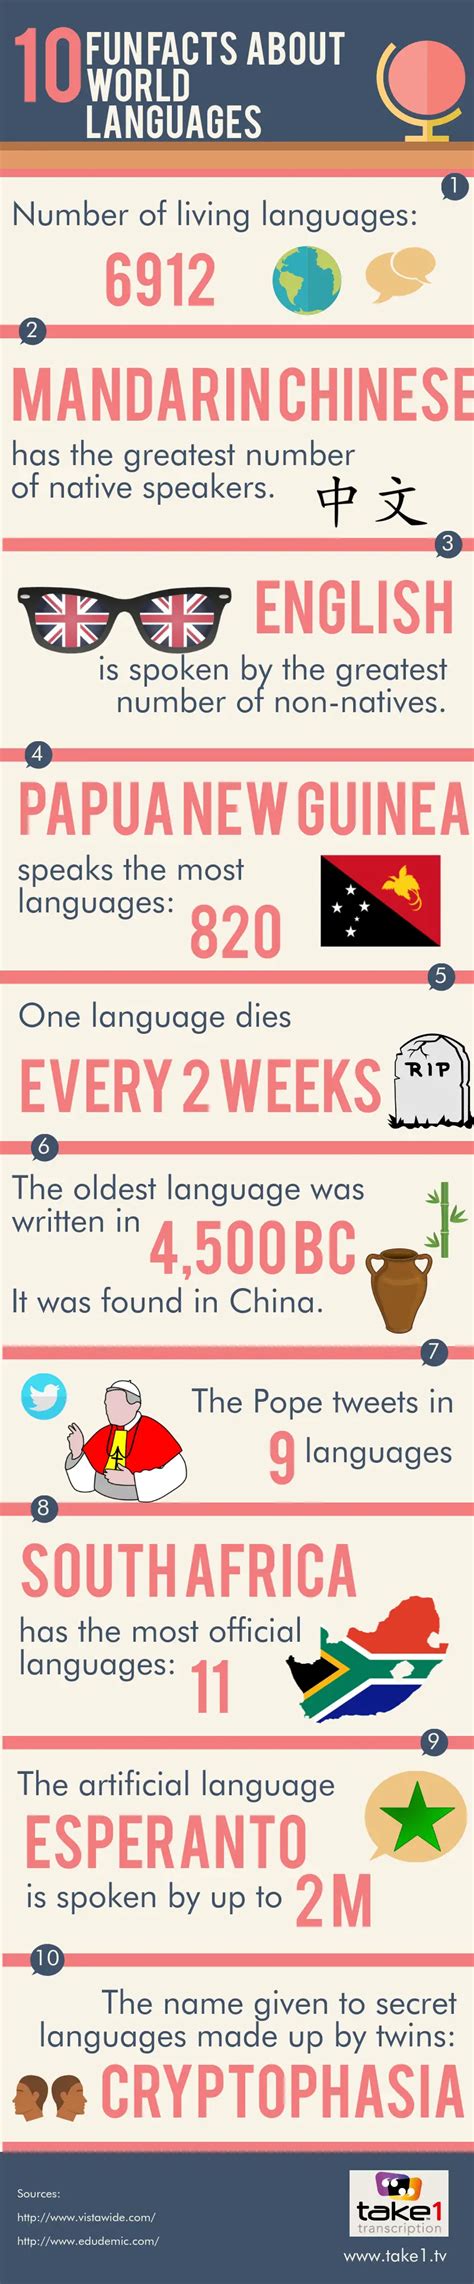 10 Interesting Facts About World Languages